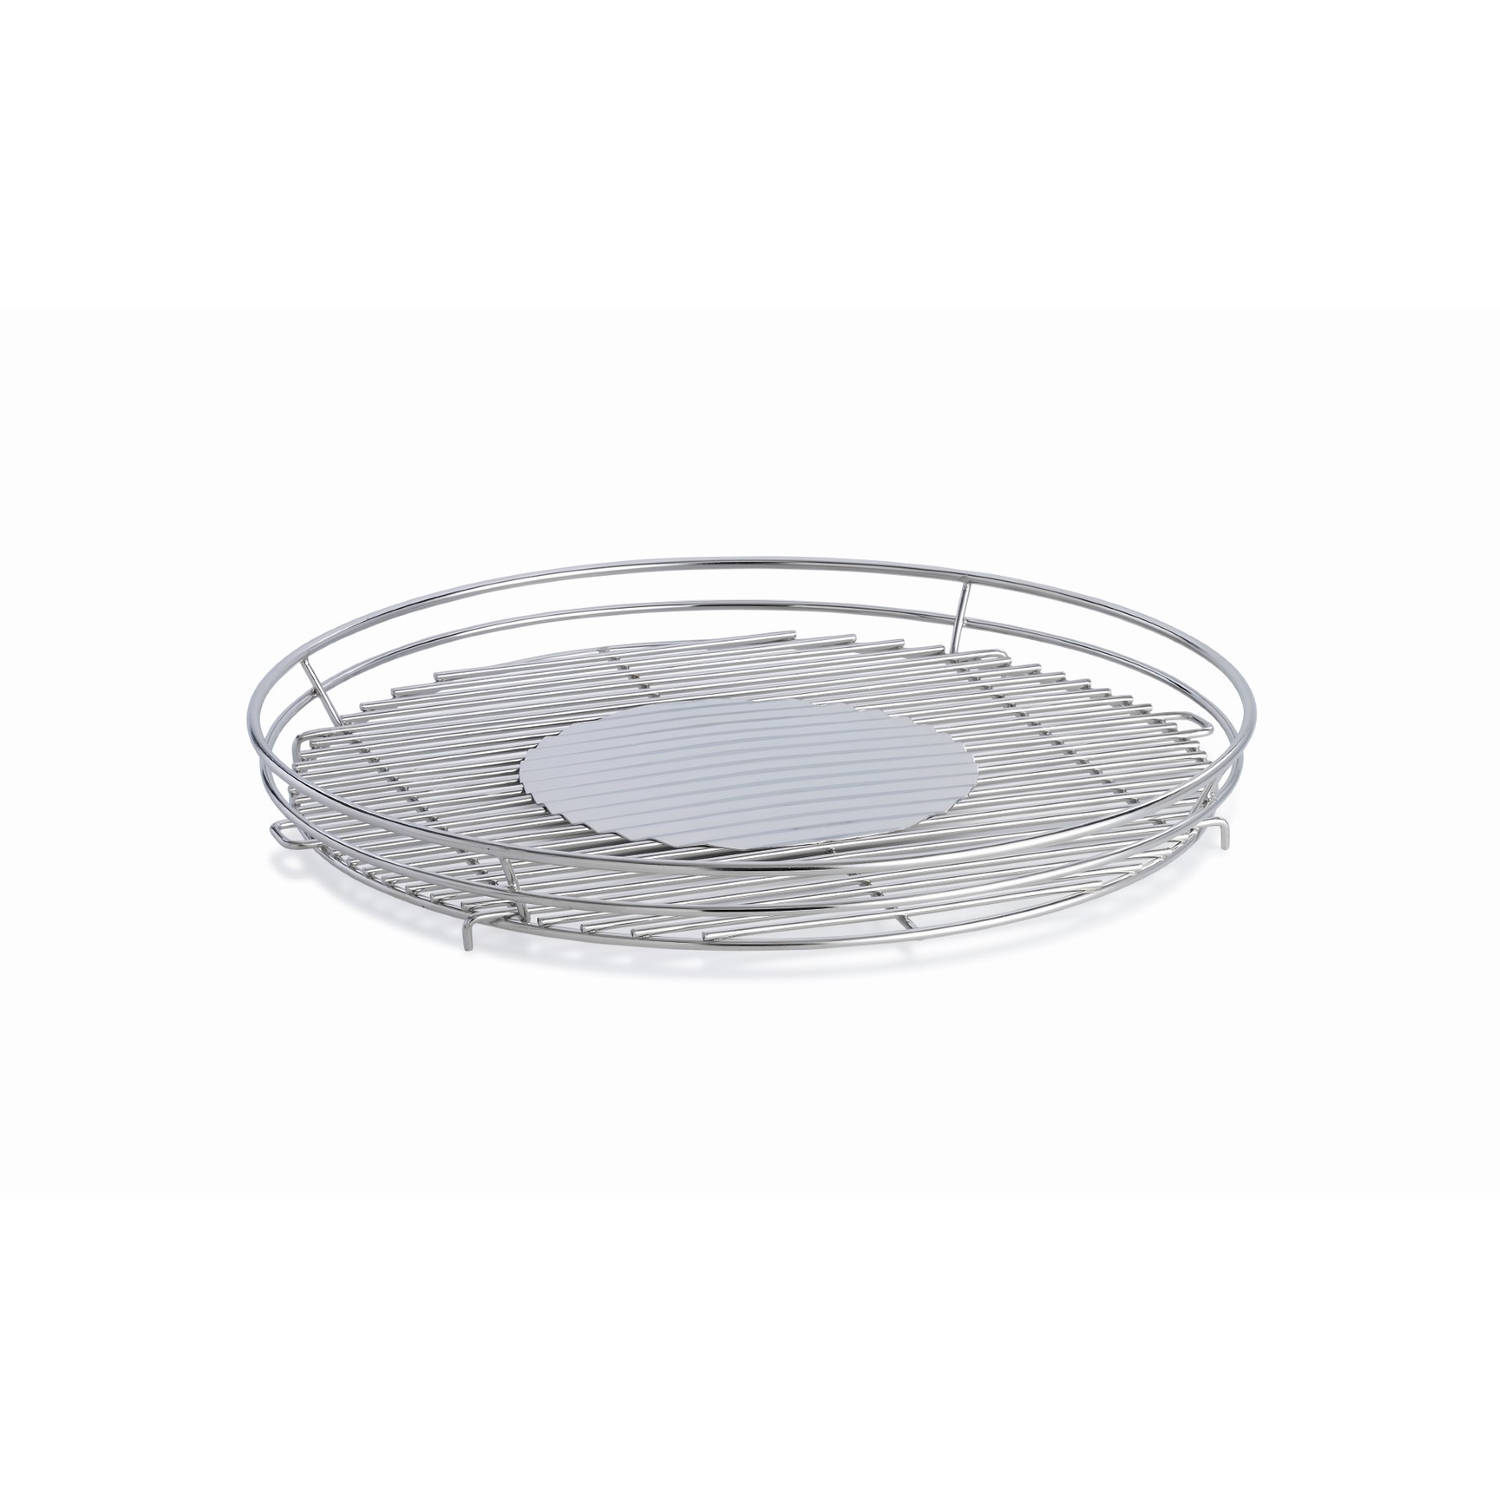 LotusGrill Xl Rooster Rvs - Diameter 405mm - Silver